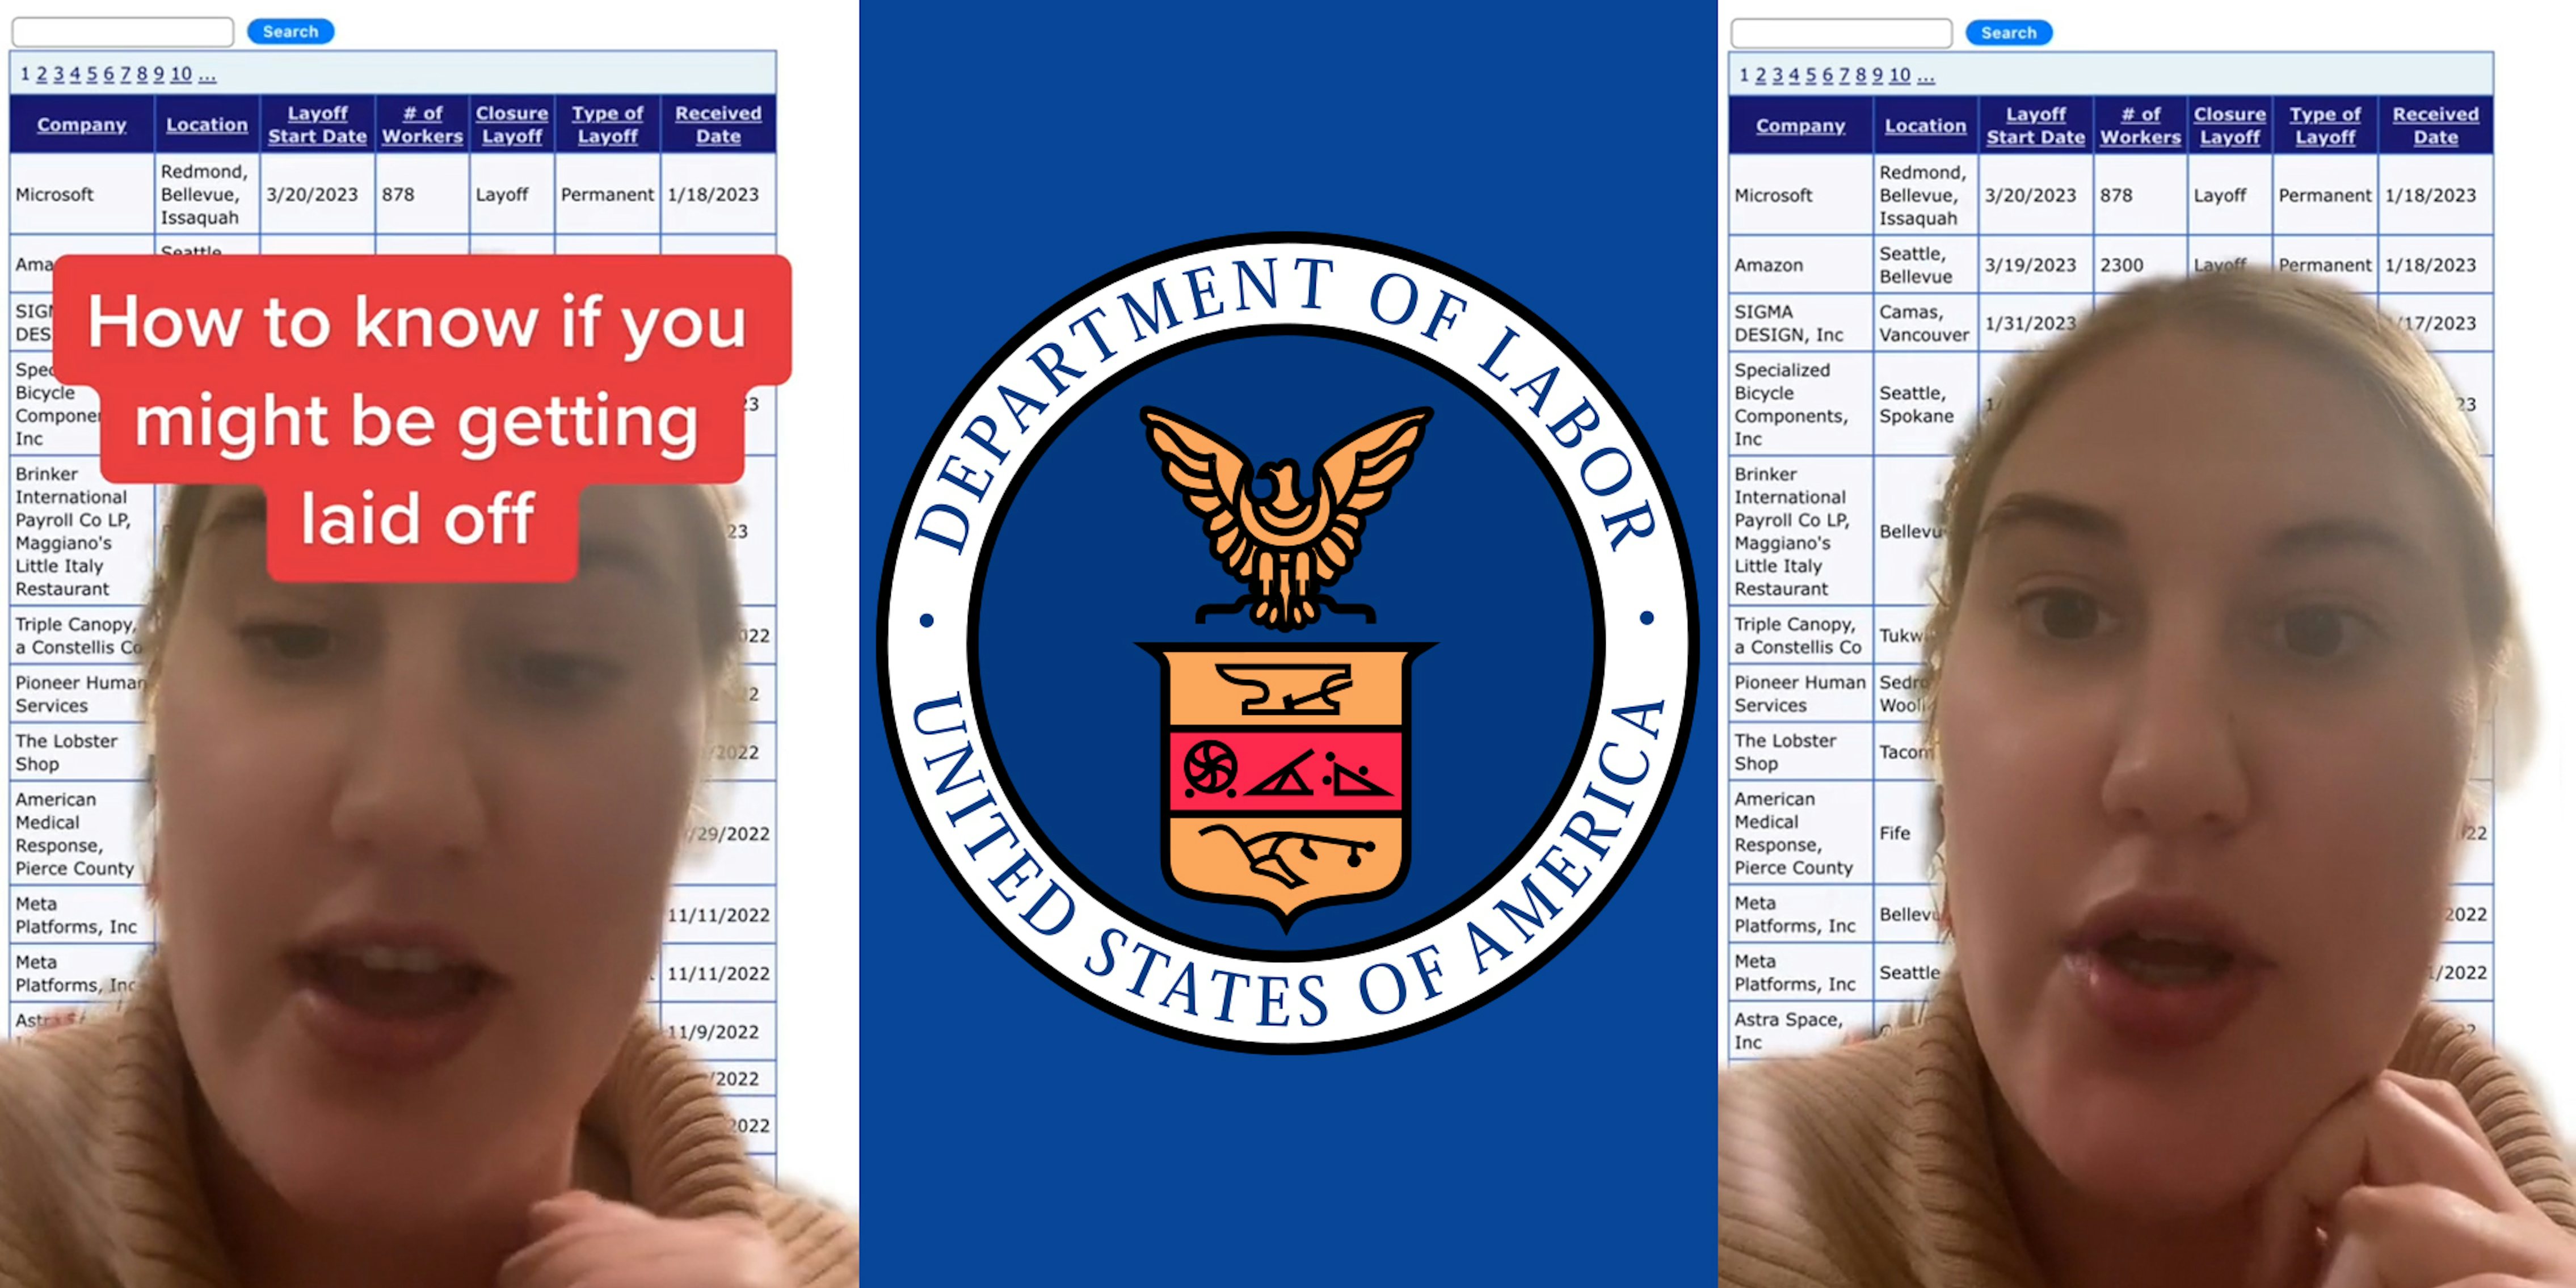 woman greenscreen TikTok over lay off list with caption 'How to know if you might be getting laid off' (l) US Department Of Labor logo over blue background (c) woman greenscreen TikTok over lay off list (r)